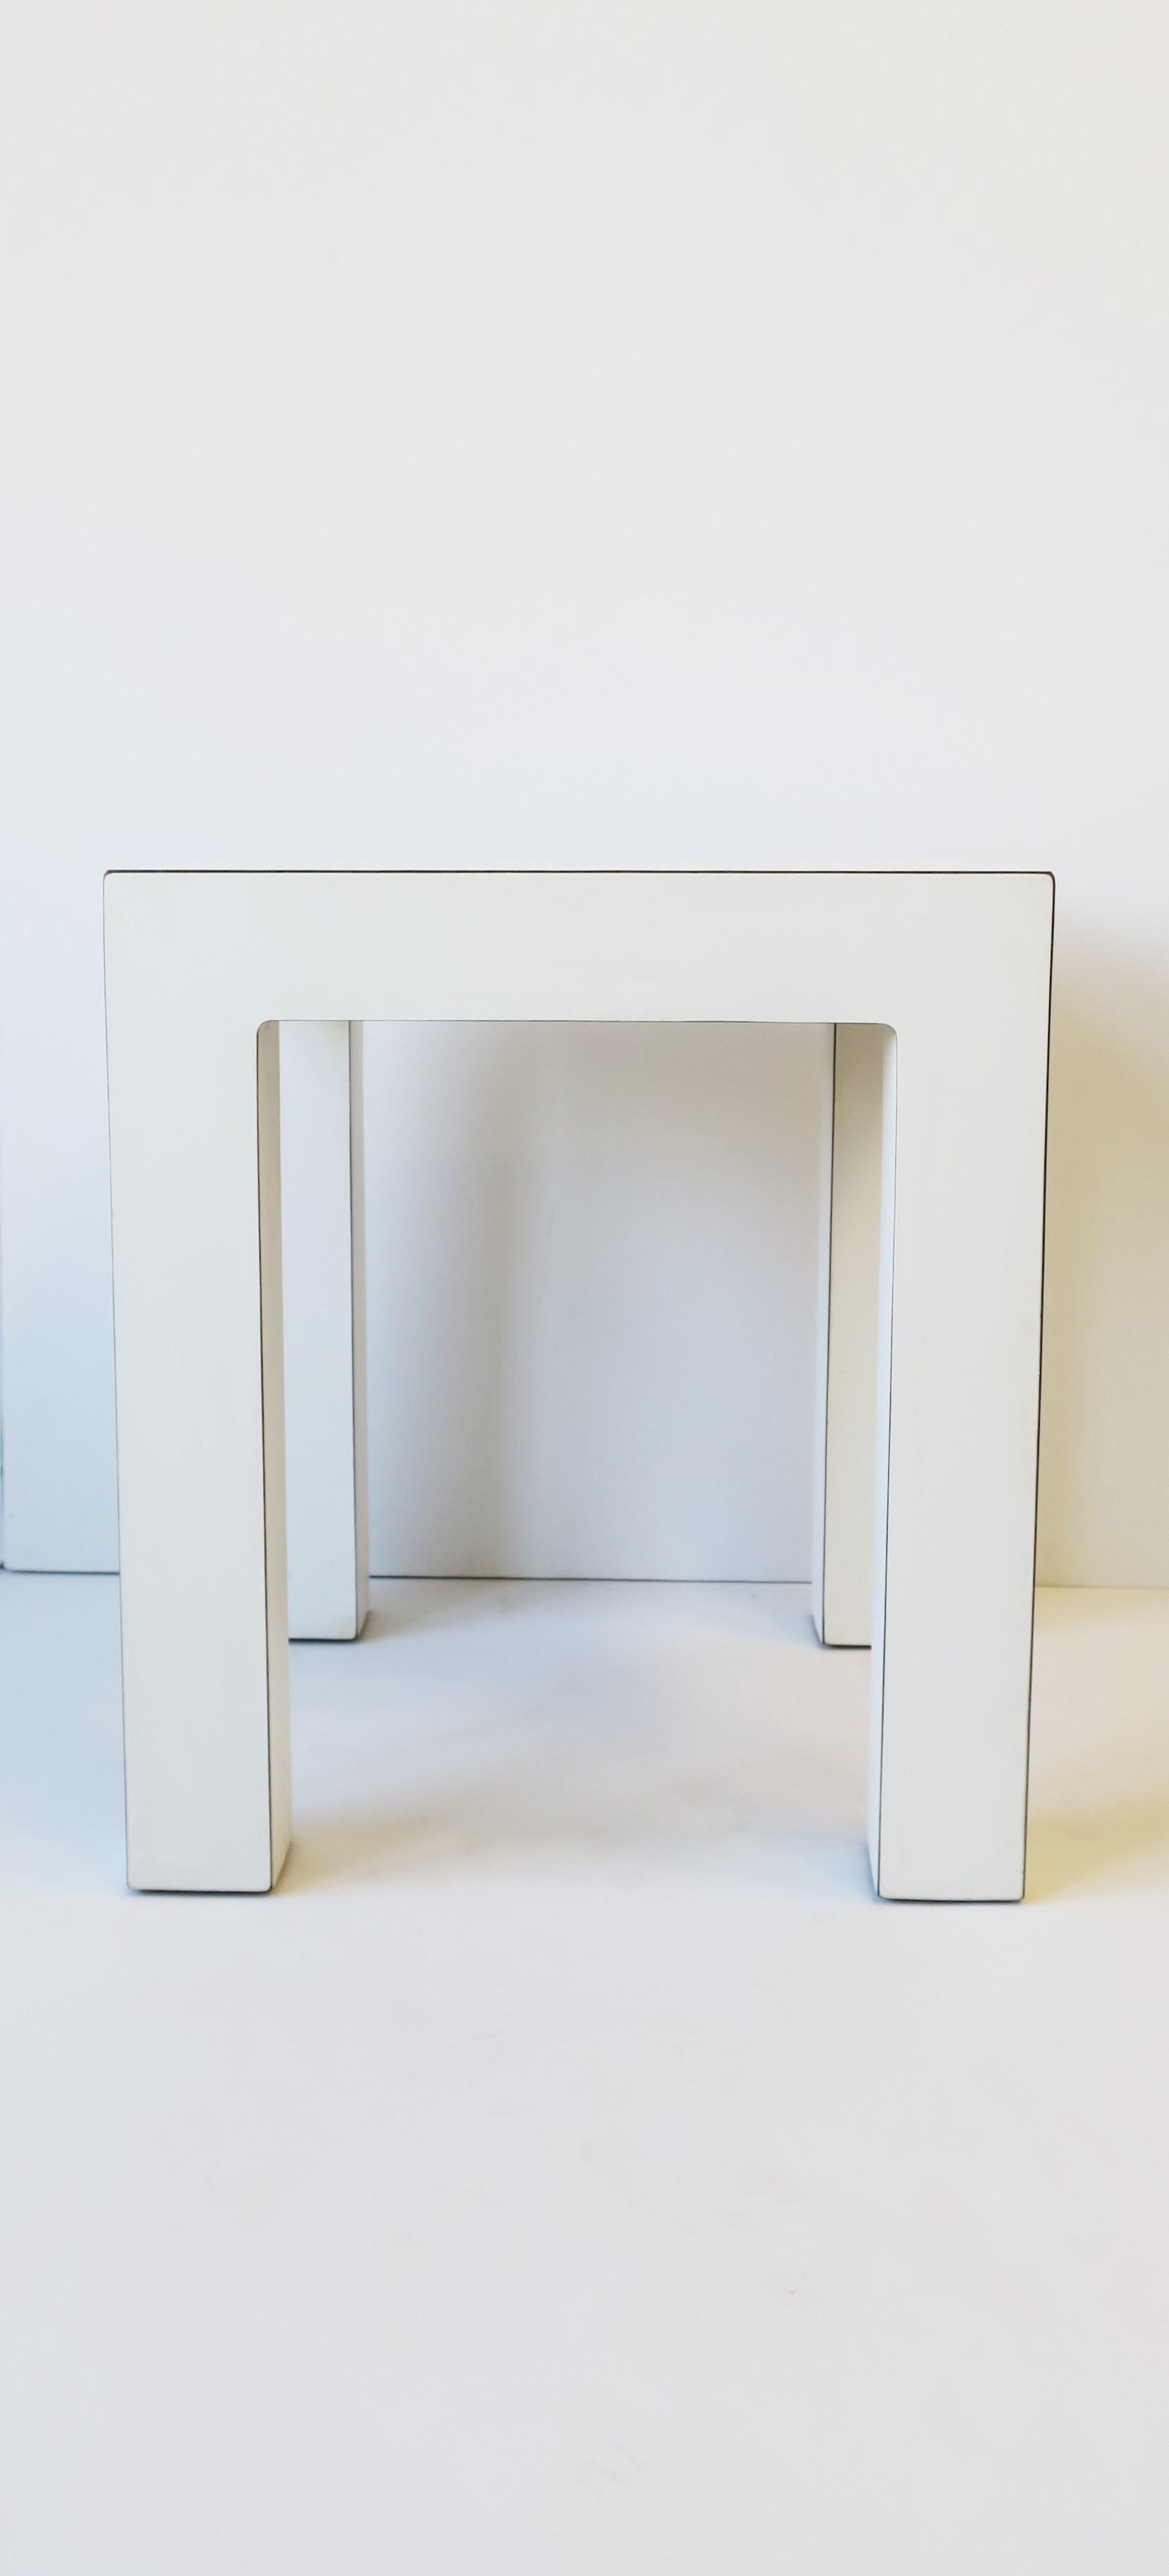 Late 20th Century Modern White End Table, ca. 1970s For Sale